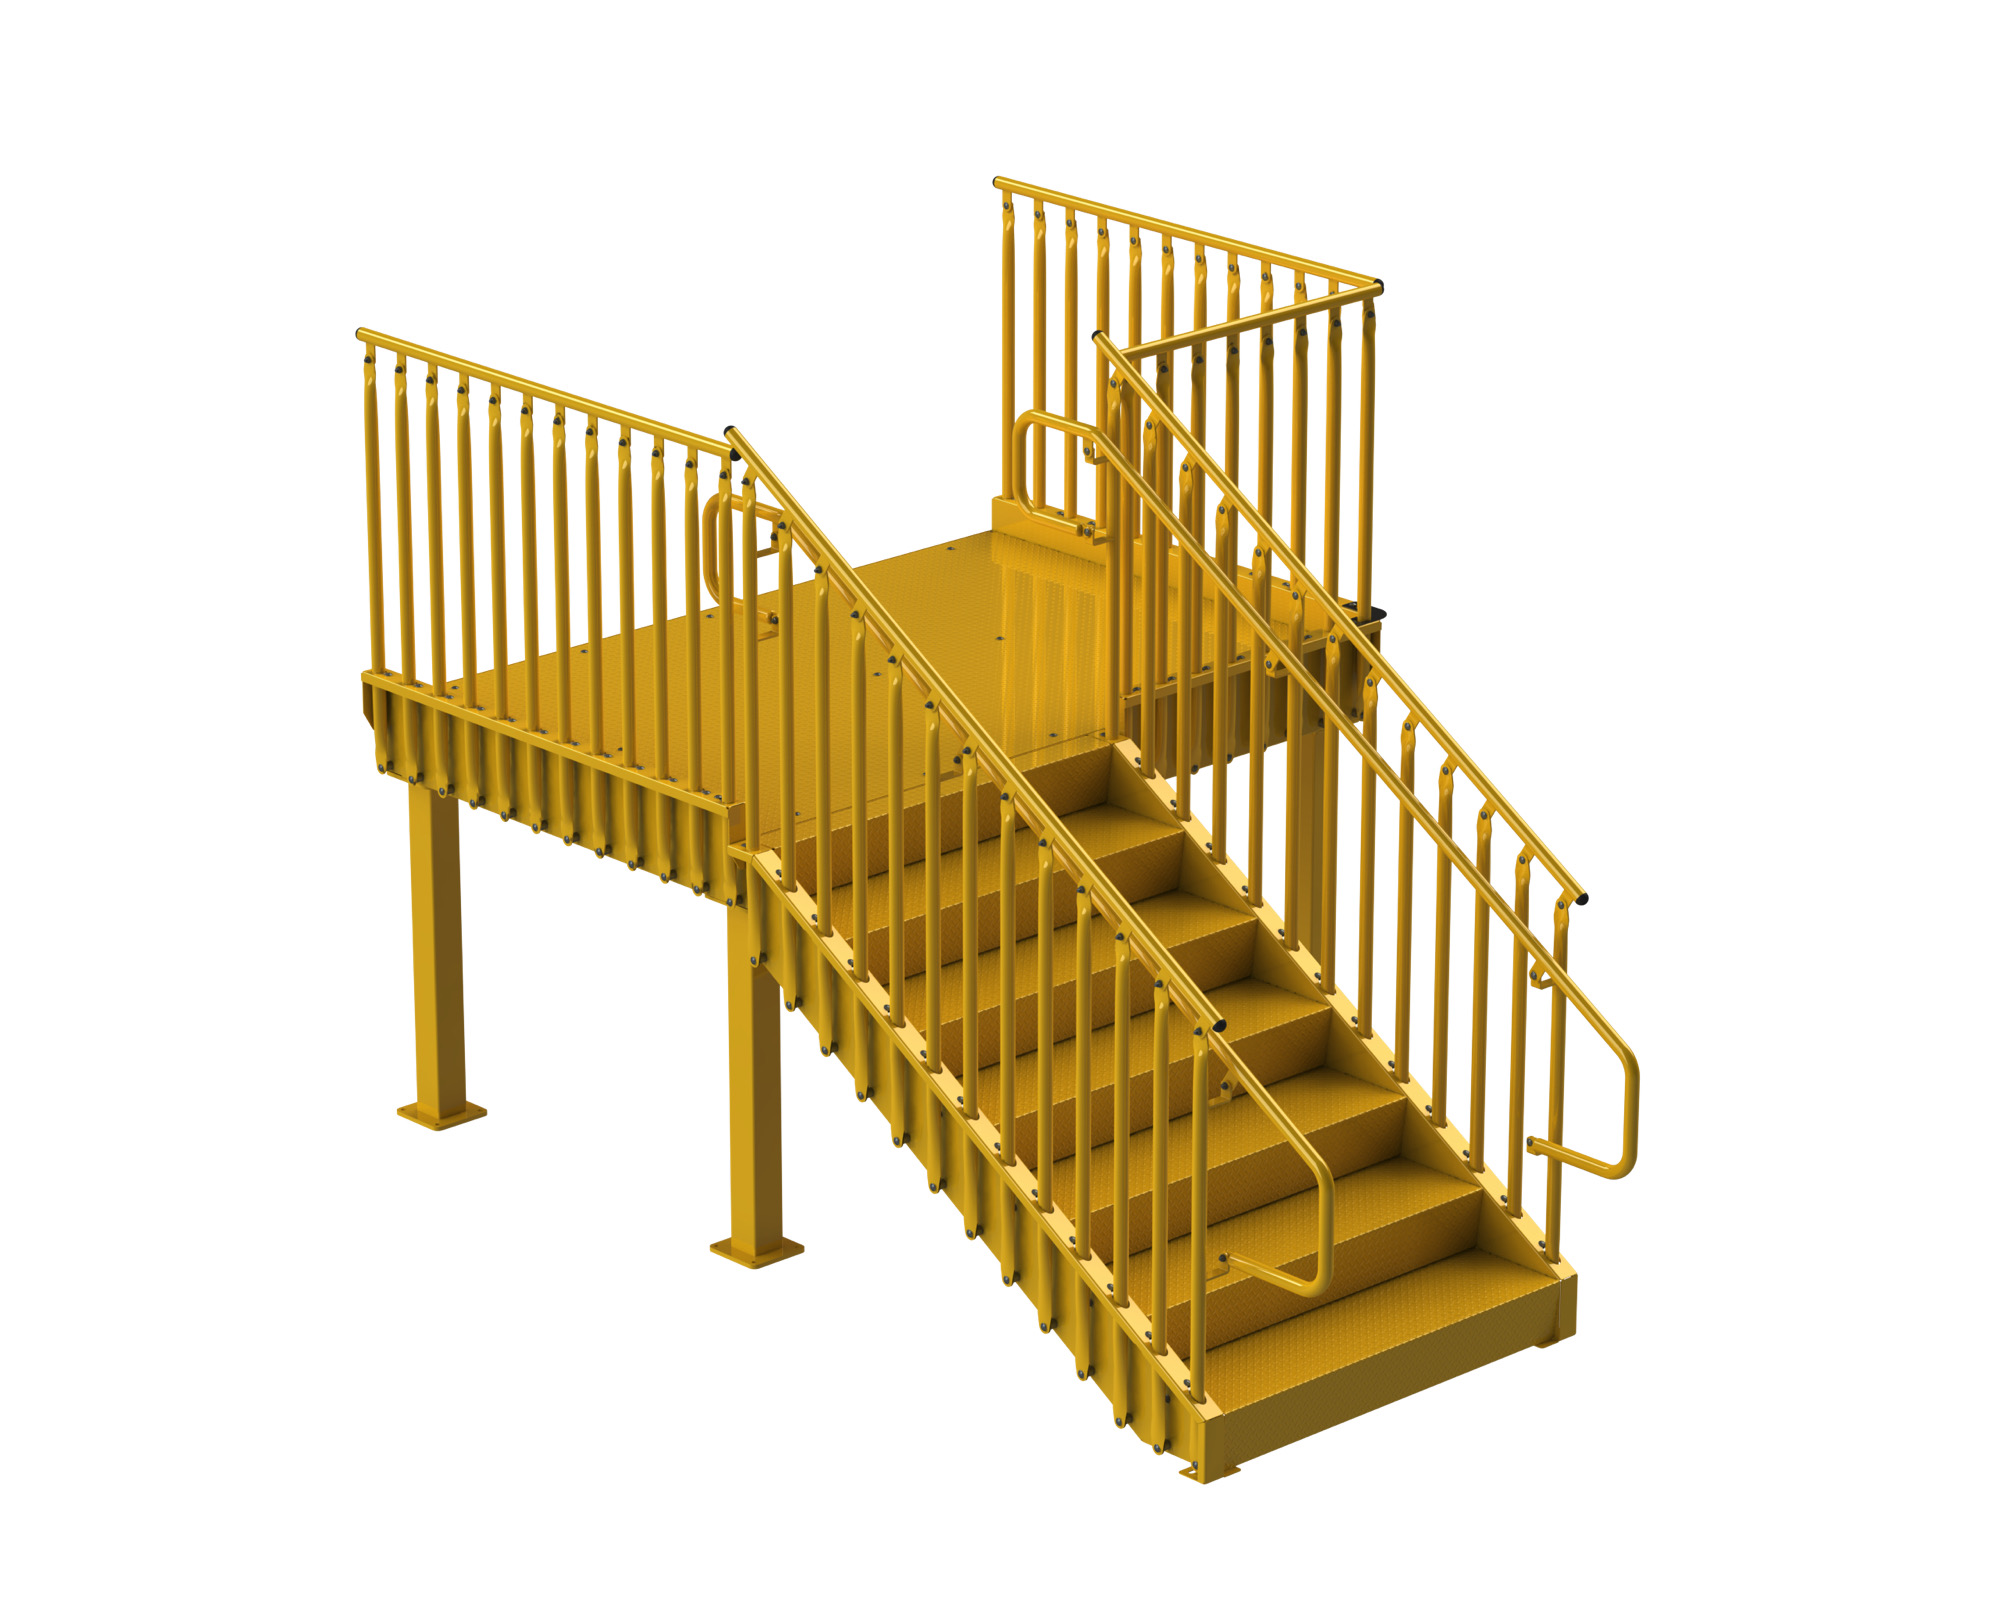 Loading Dock Stairs, Steel, Safety Yellow, Diamond Plate, IBC-Commercial, Accessible Platform